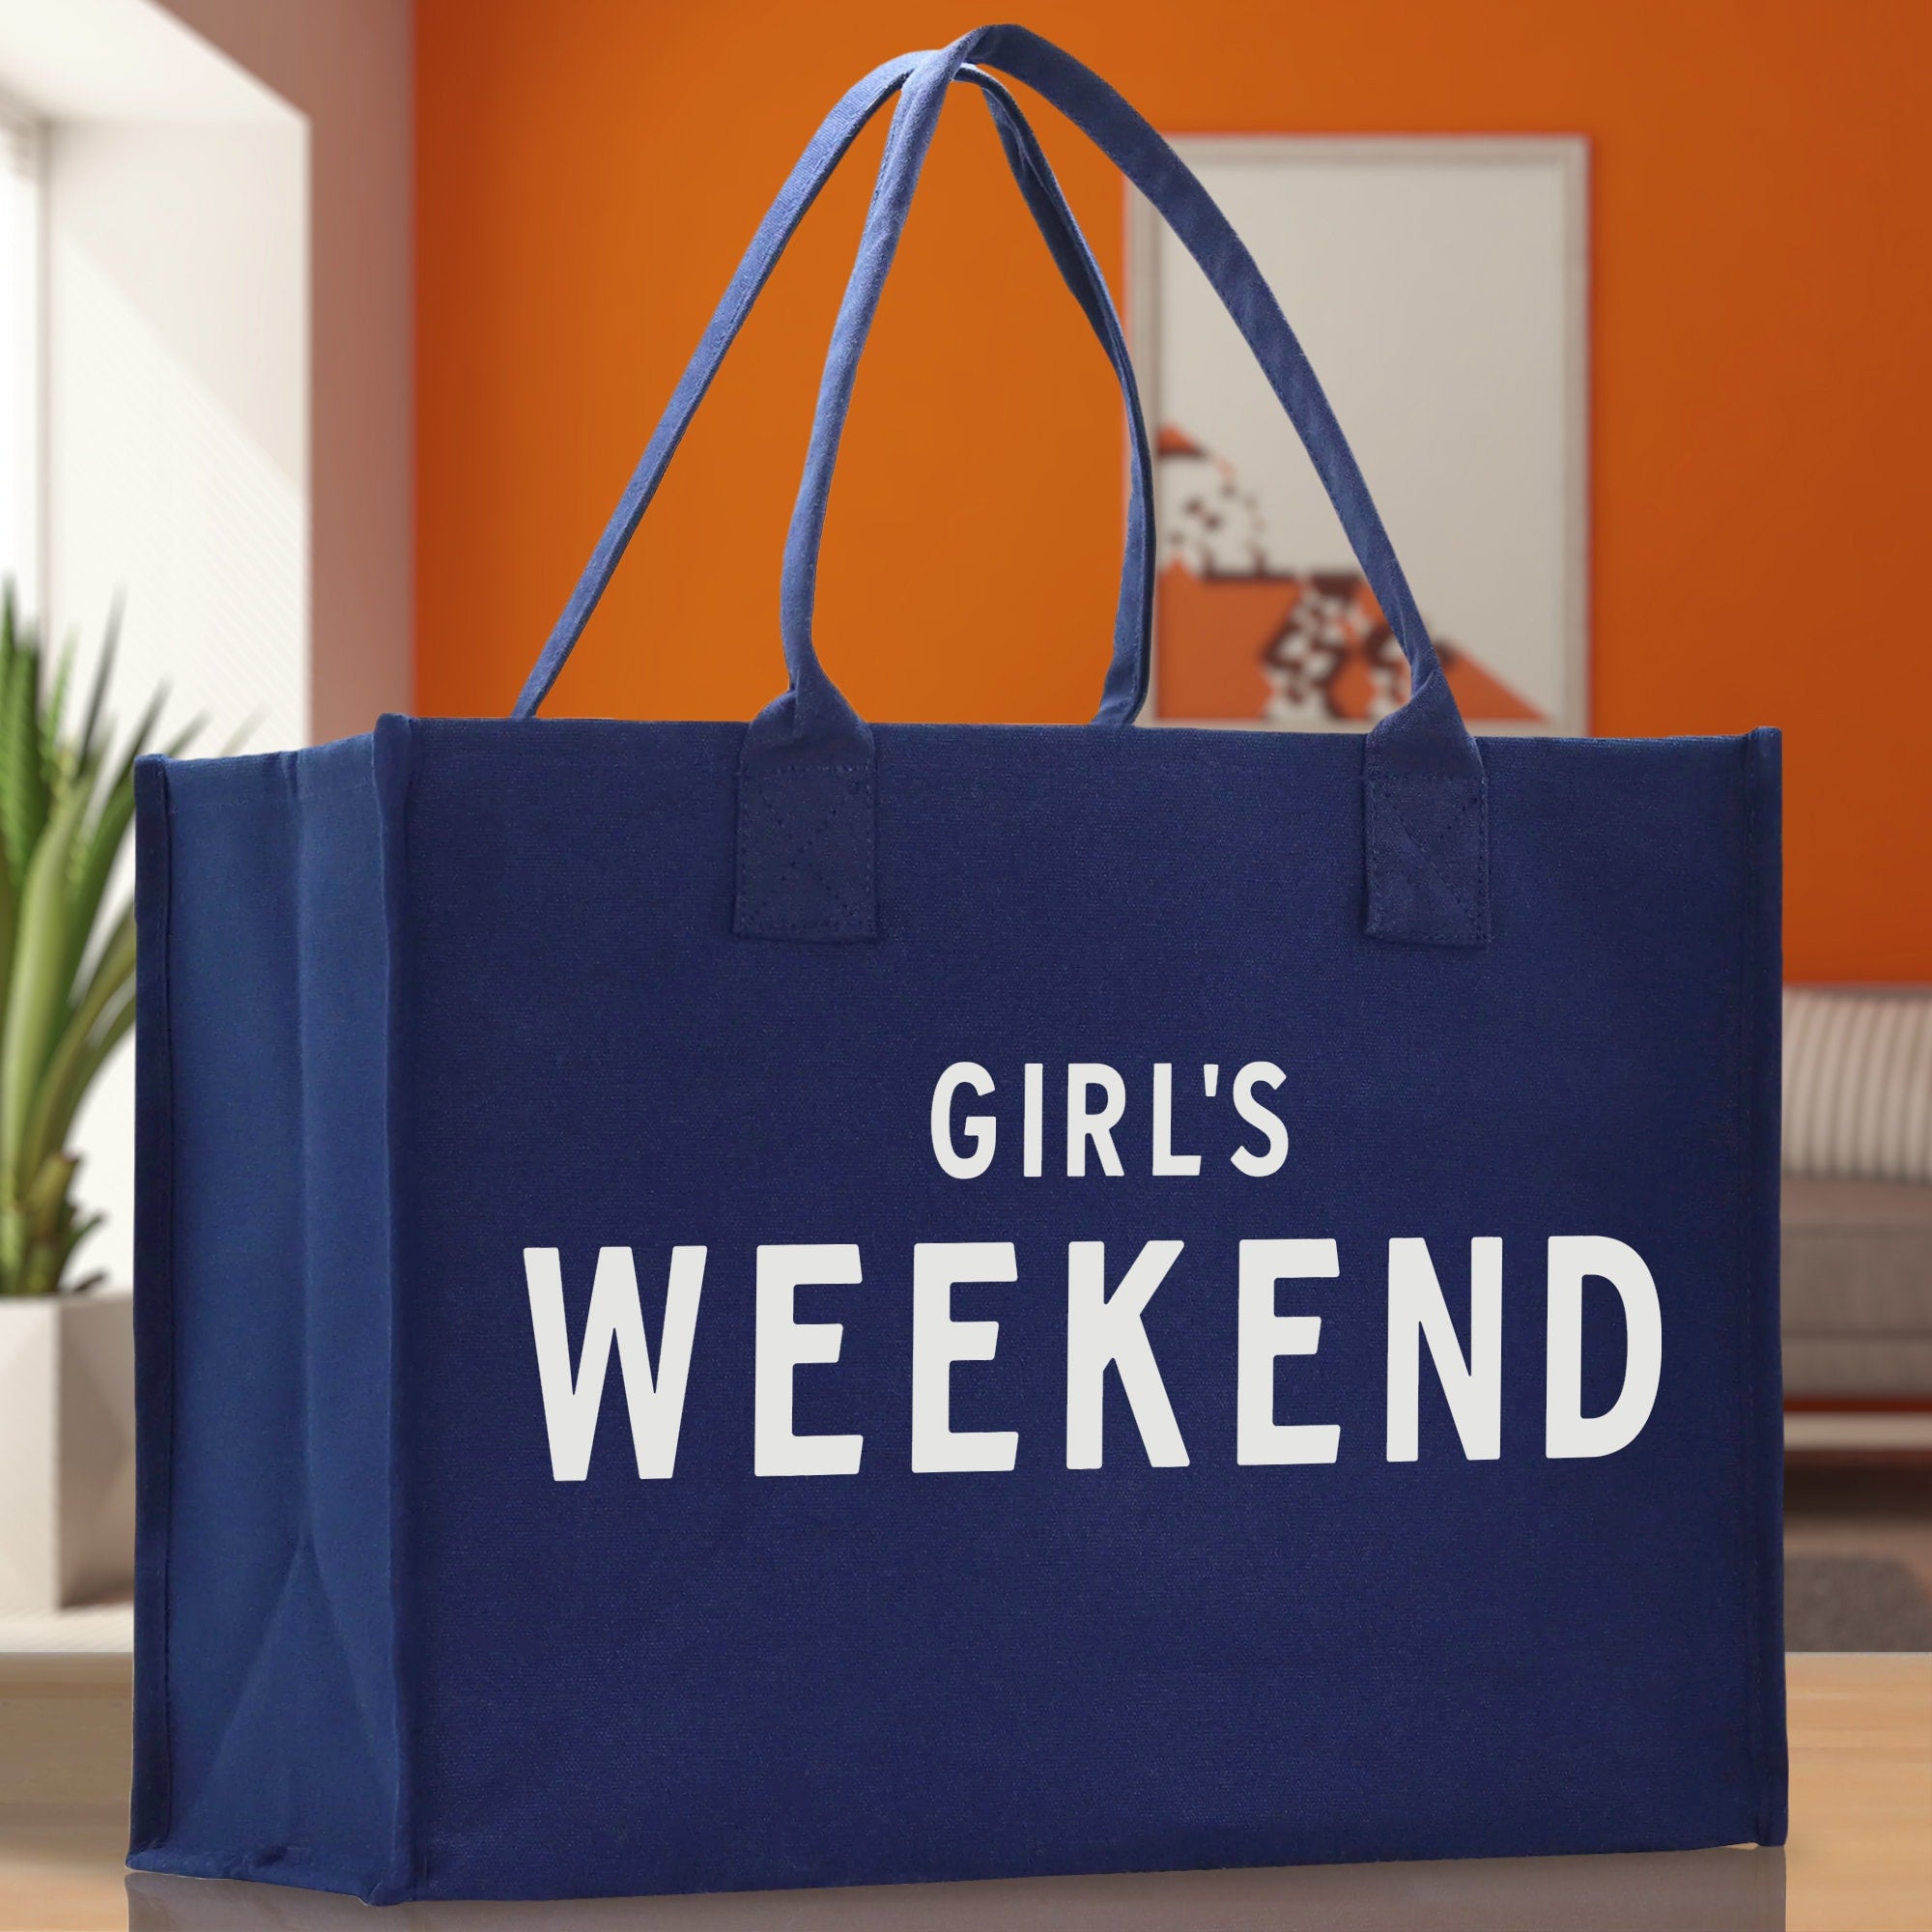 Girl's Weekend Cotton Canvas Chic Beach Tote Bag Multipurpose Tote Weekender Tote Gift for Her Outdoor Tote Vacation Tote Large Beach Bag